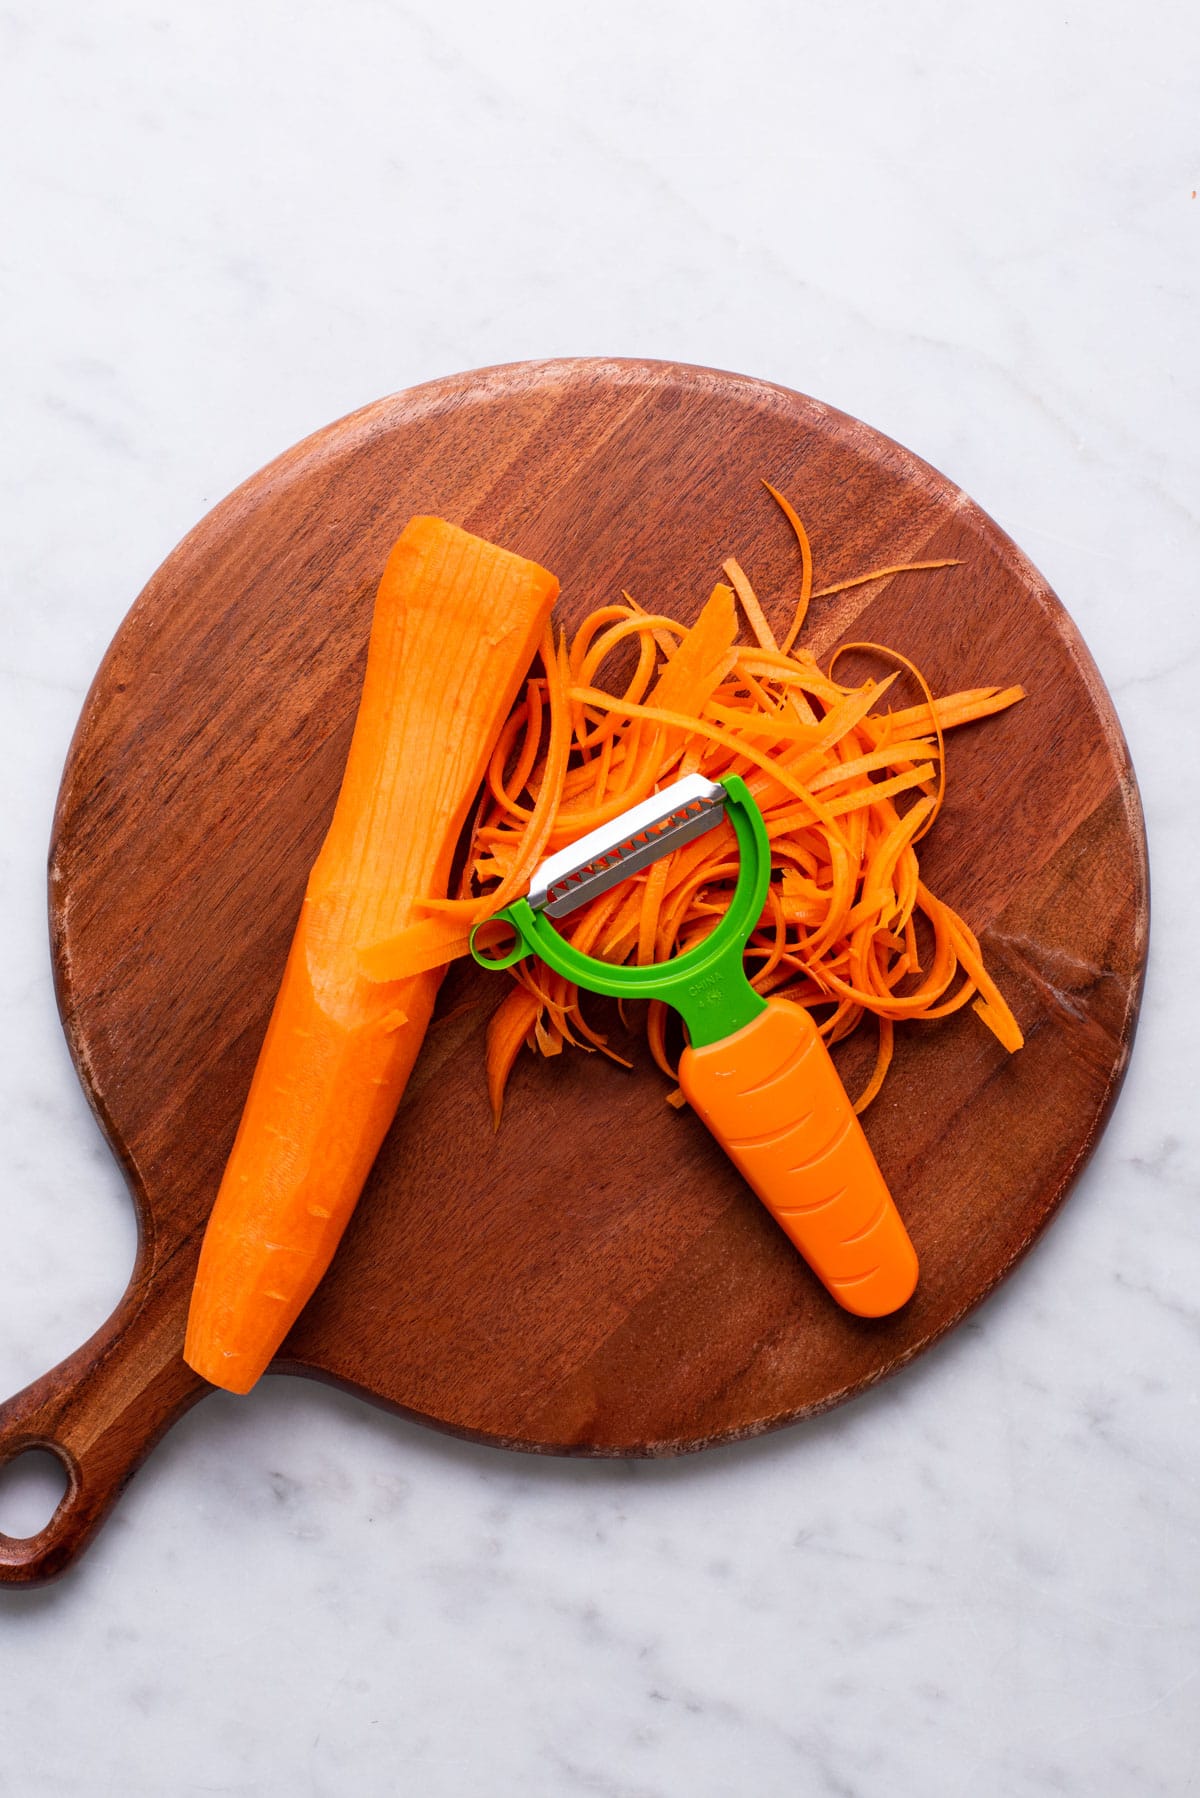 Julienned carrots on a wooden cutting board with a Y-peeler.